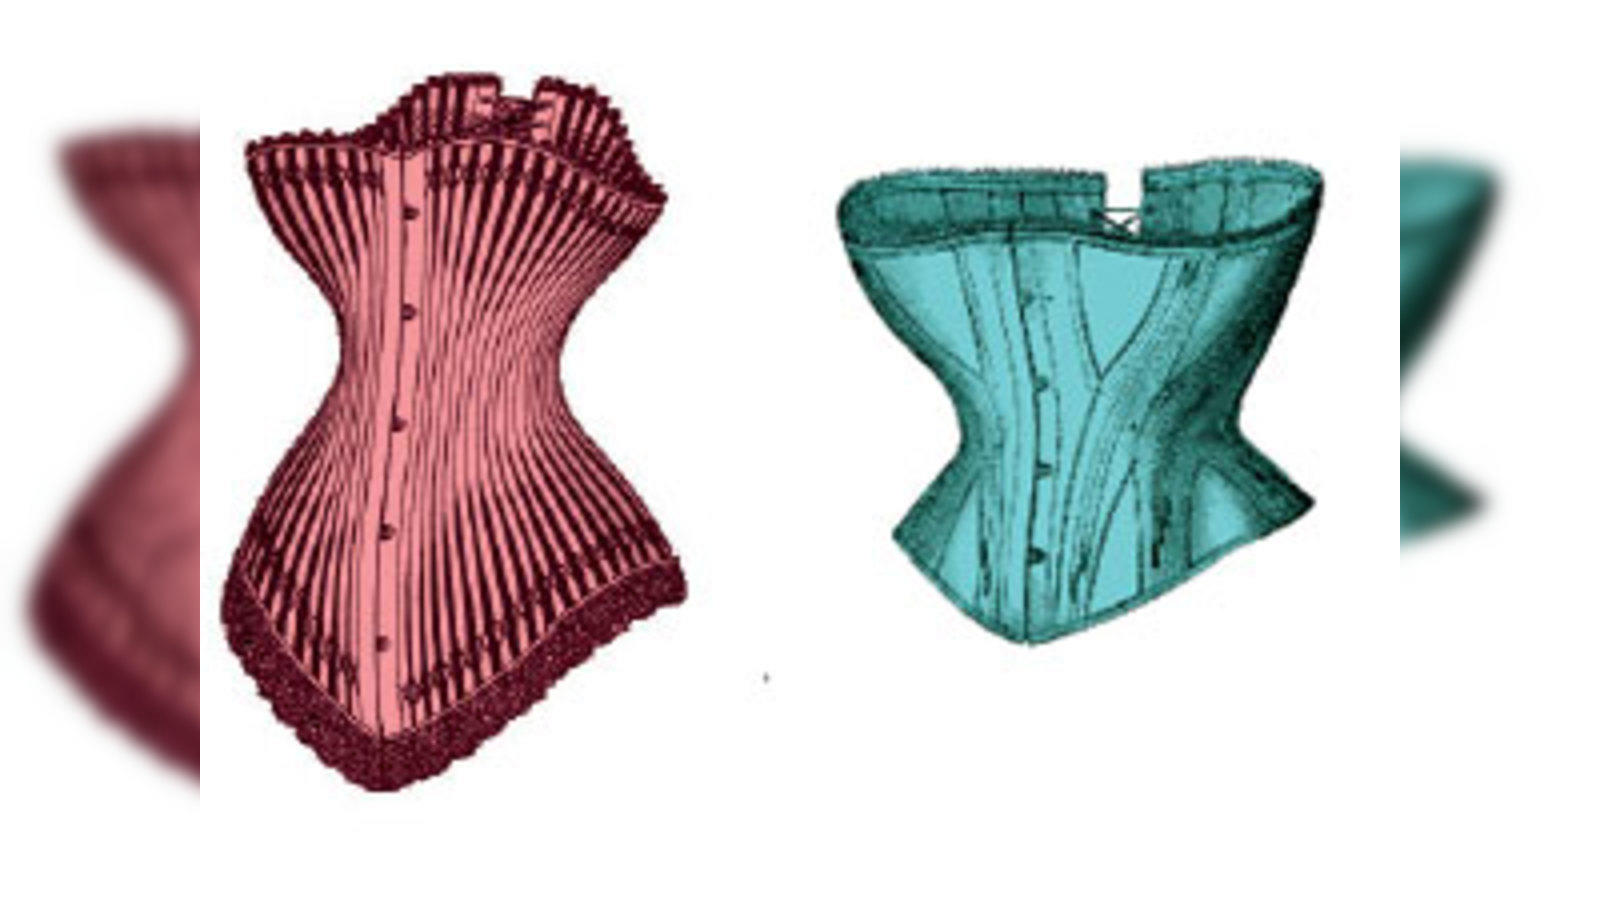 What is the difference between a corset and a fashion corset? – Dibo Bodi